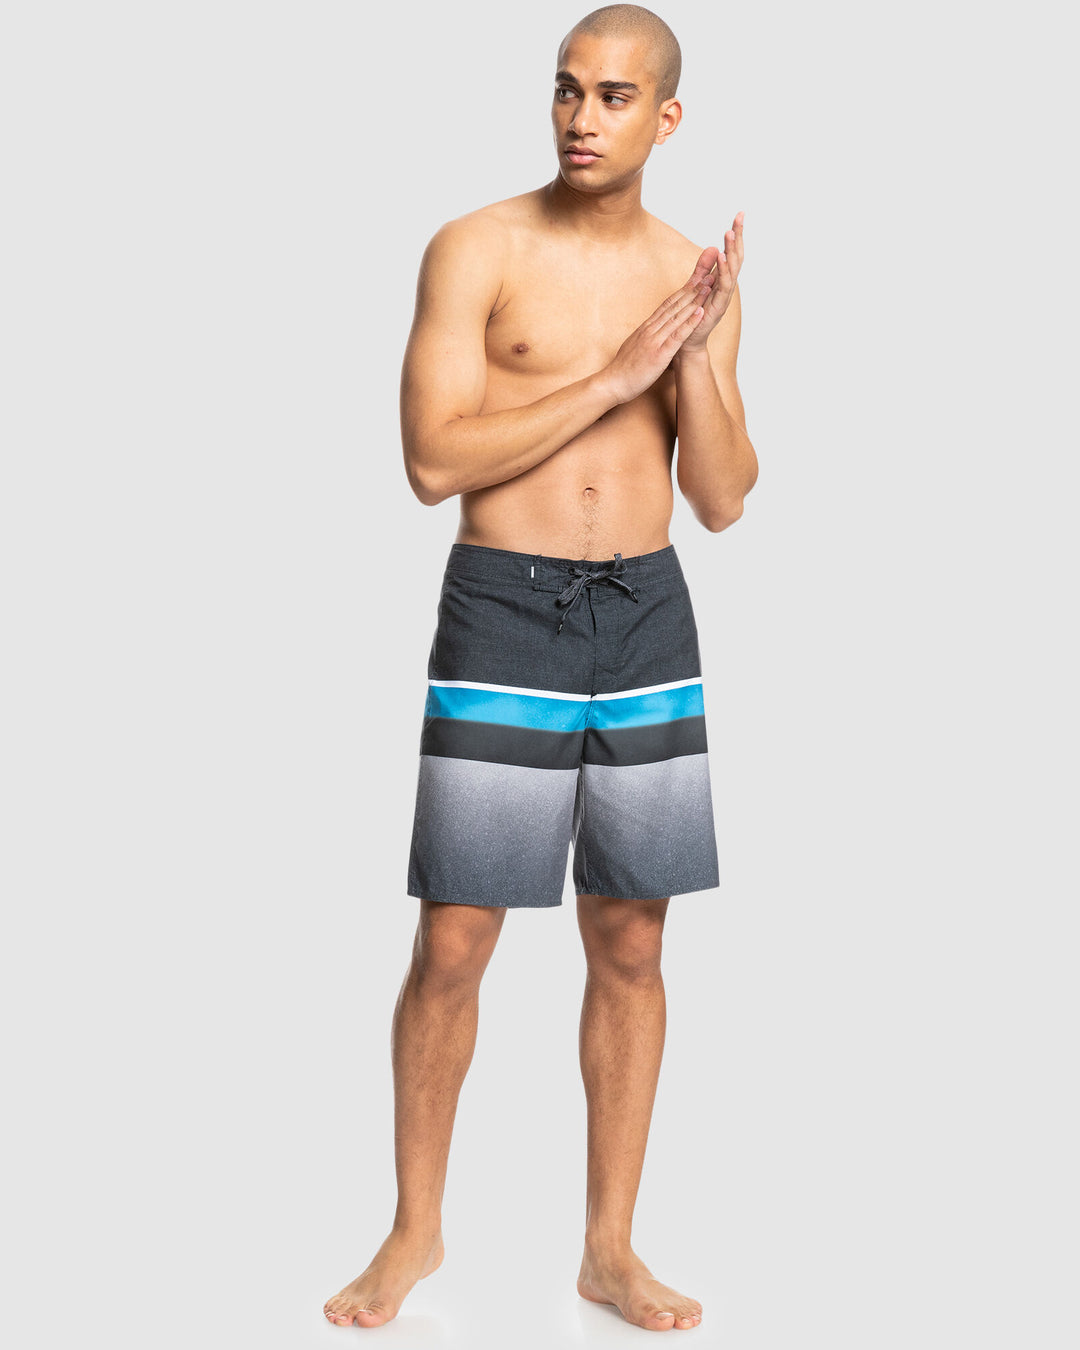 Everyday Swell Vision Mens Boardshort 19" - Iron Gate